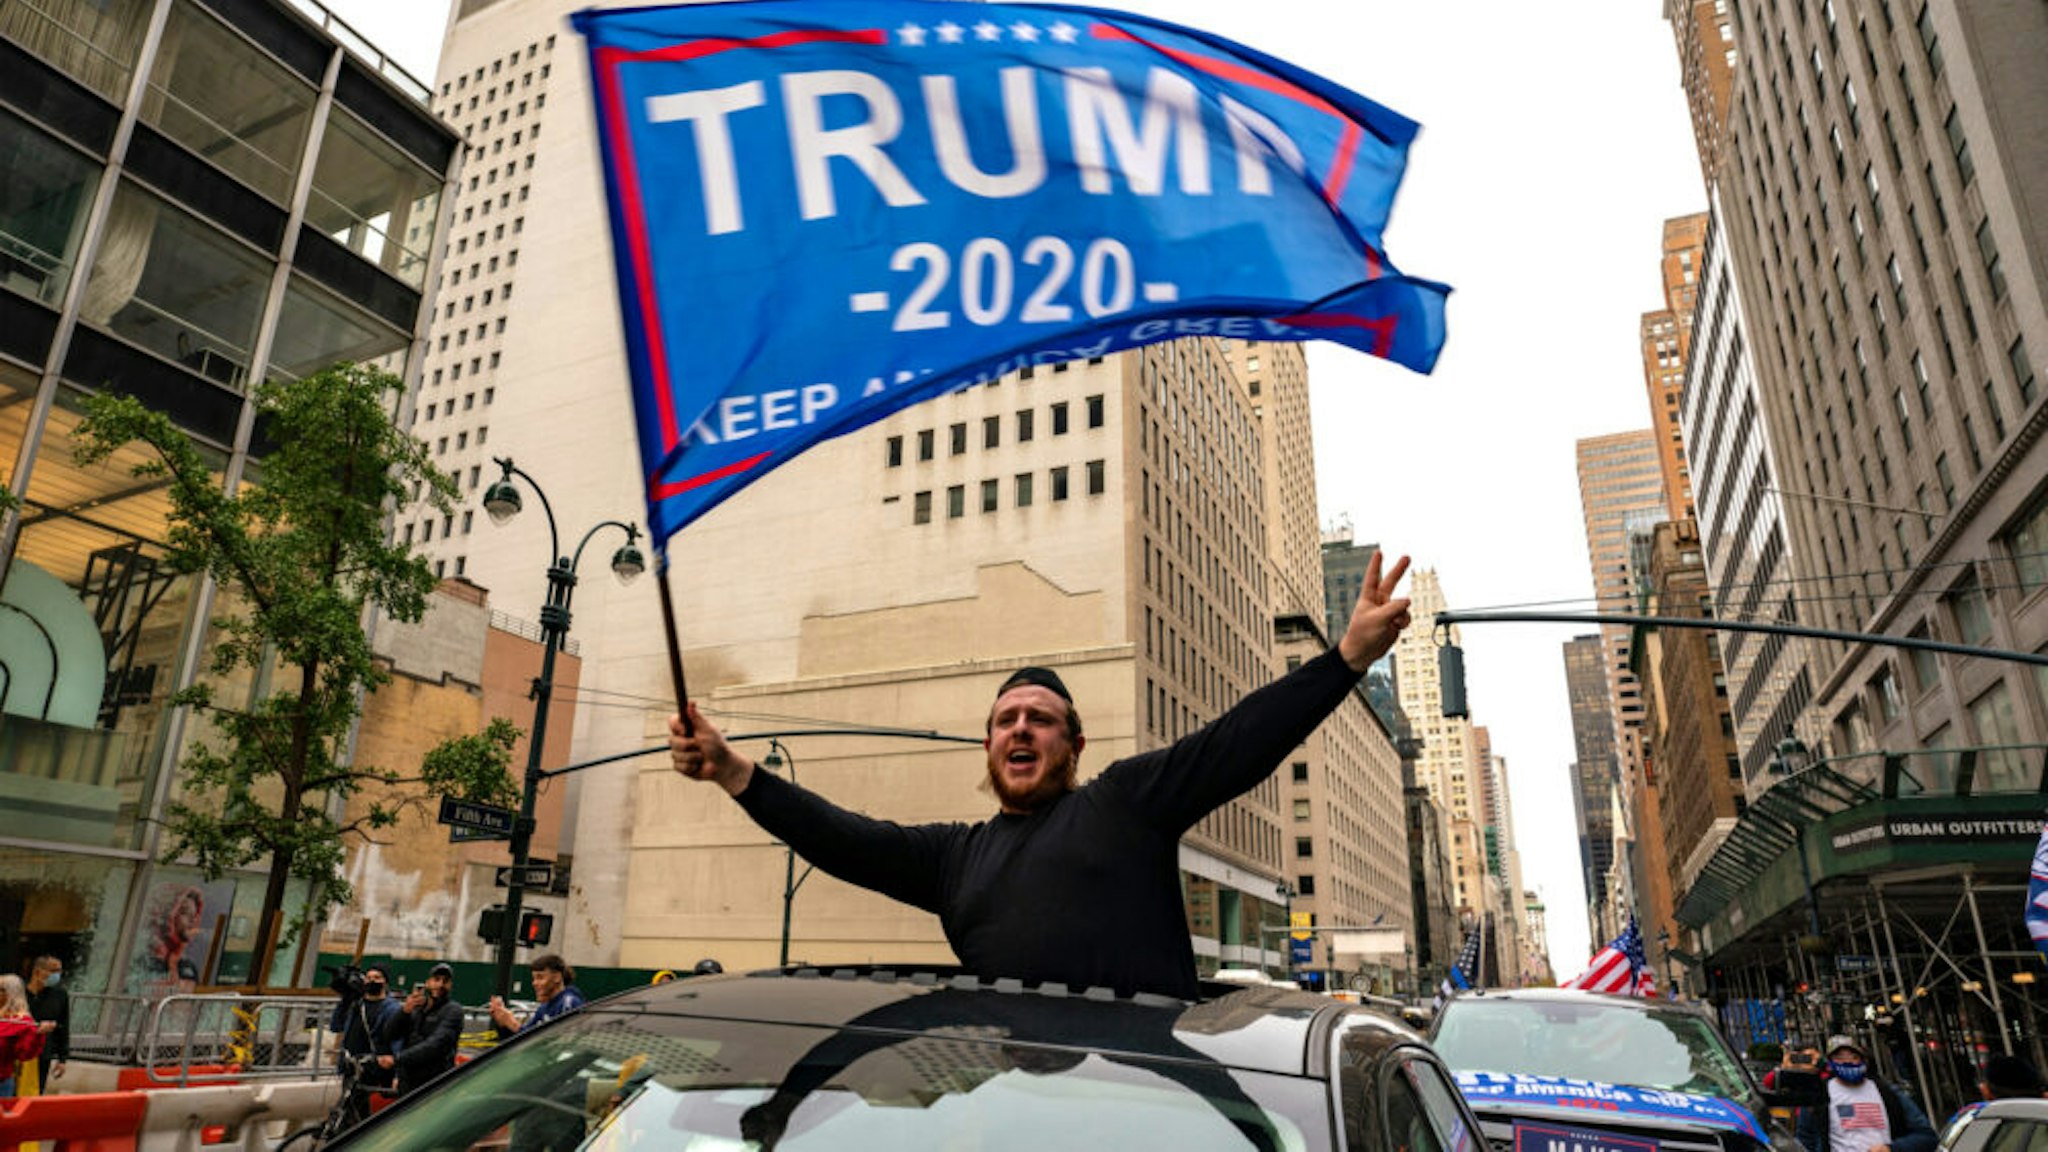 NEW YORK, NY - OCTOBER 25: A person participates in a march and rally for President Donald Trump on 5th Avenue on October 25, 2020 in New York City. As the November 3rd presidential election nears, Trump supporters and protestors have taken to the streets to be heard.